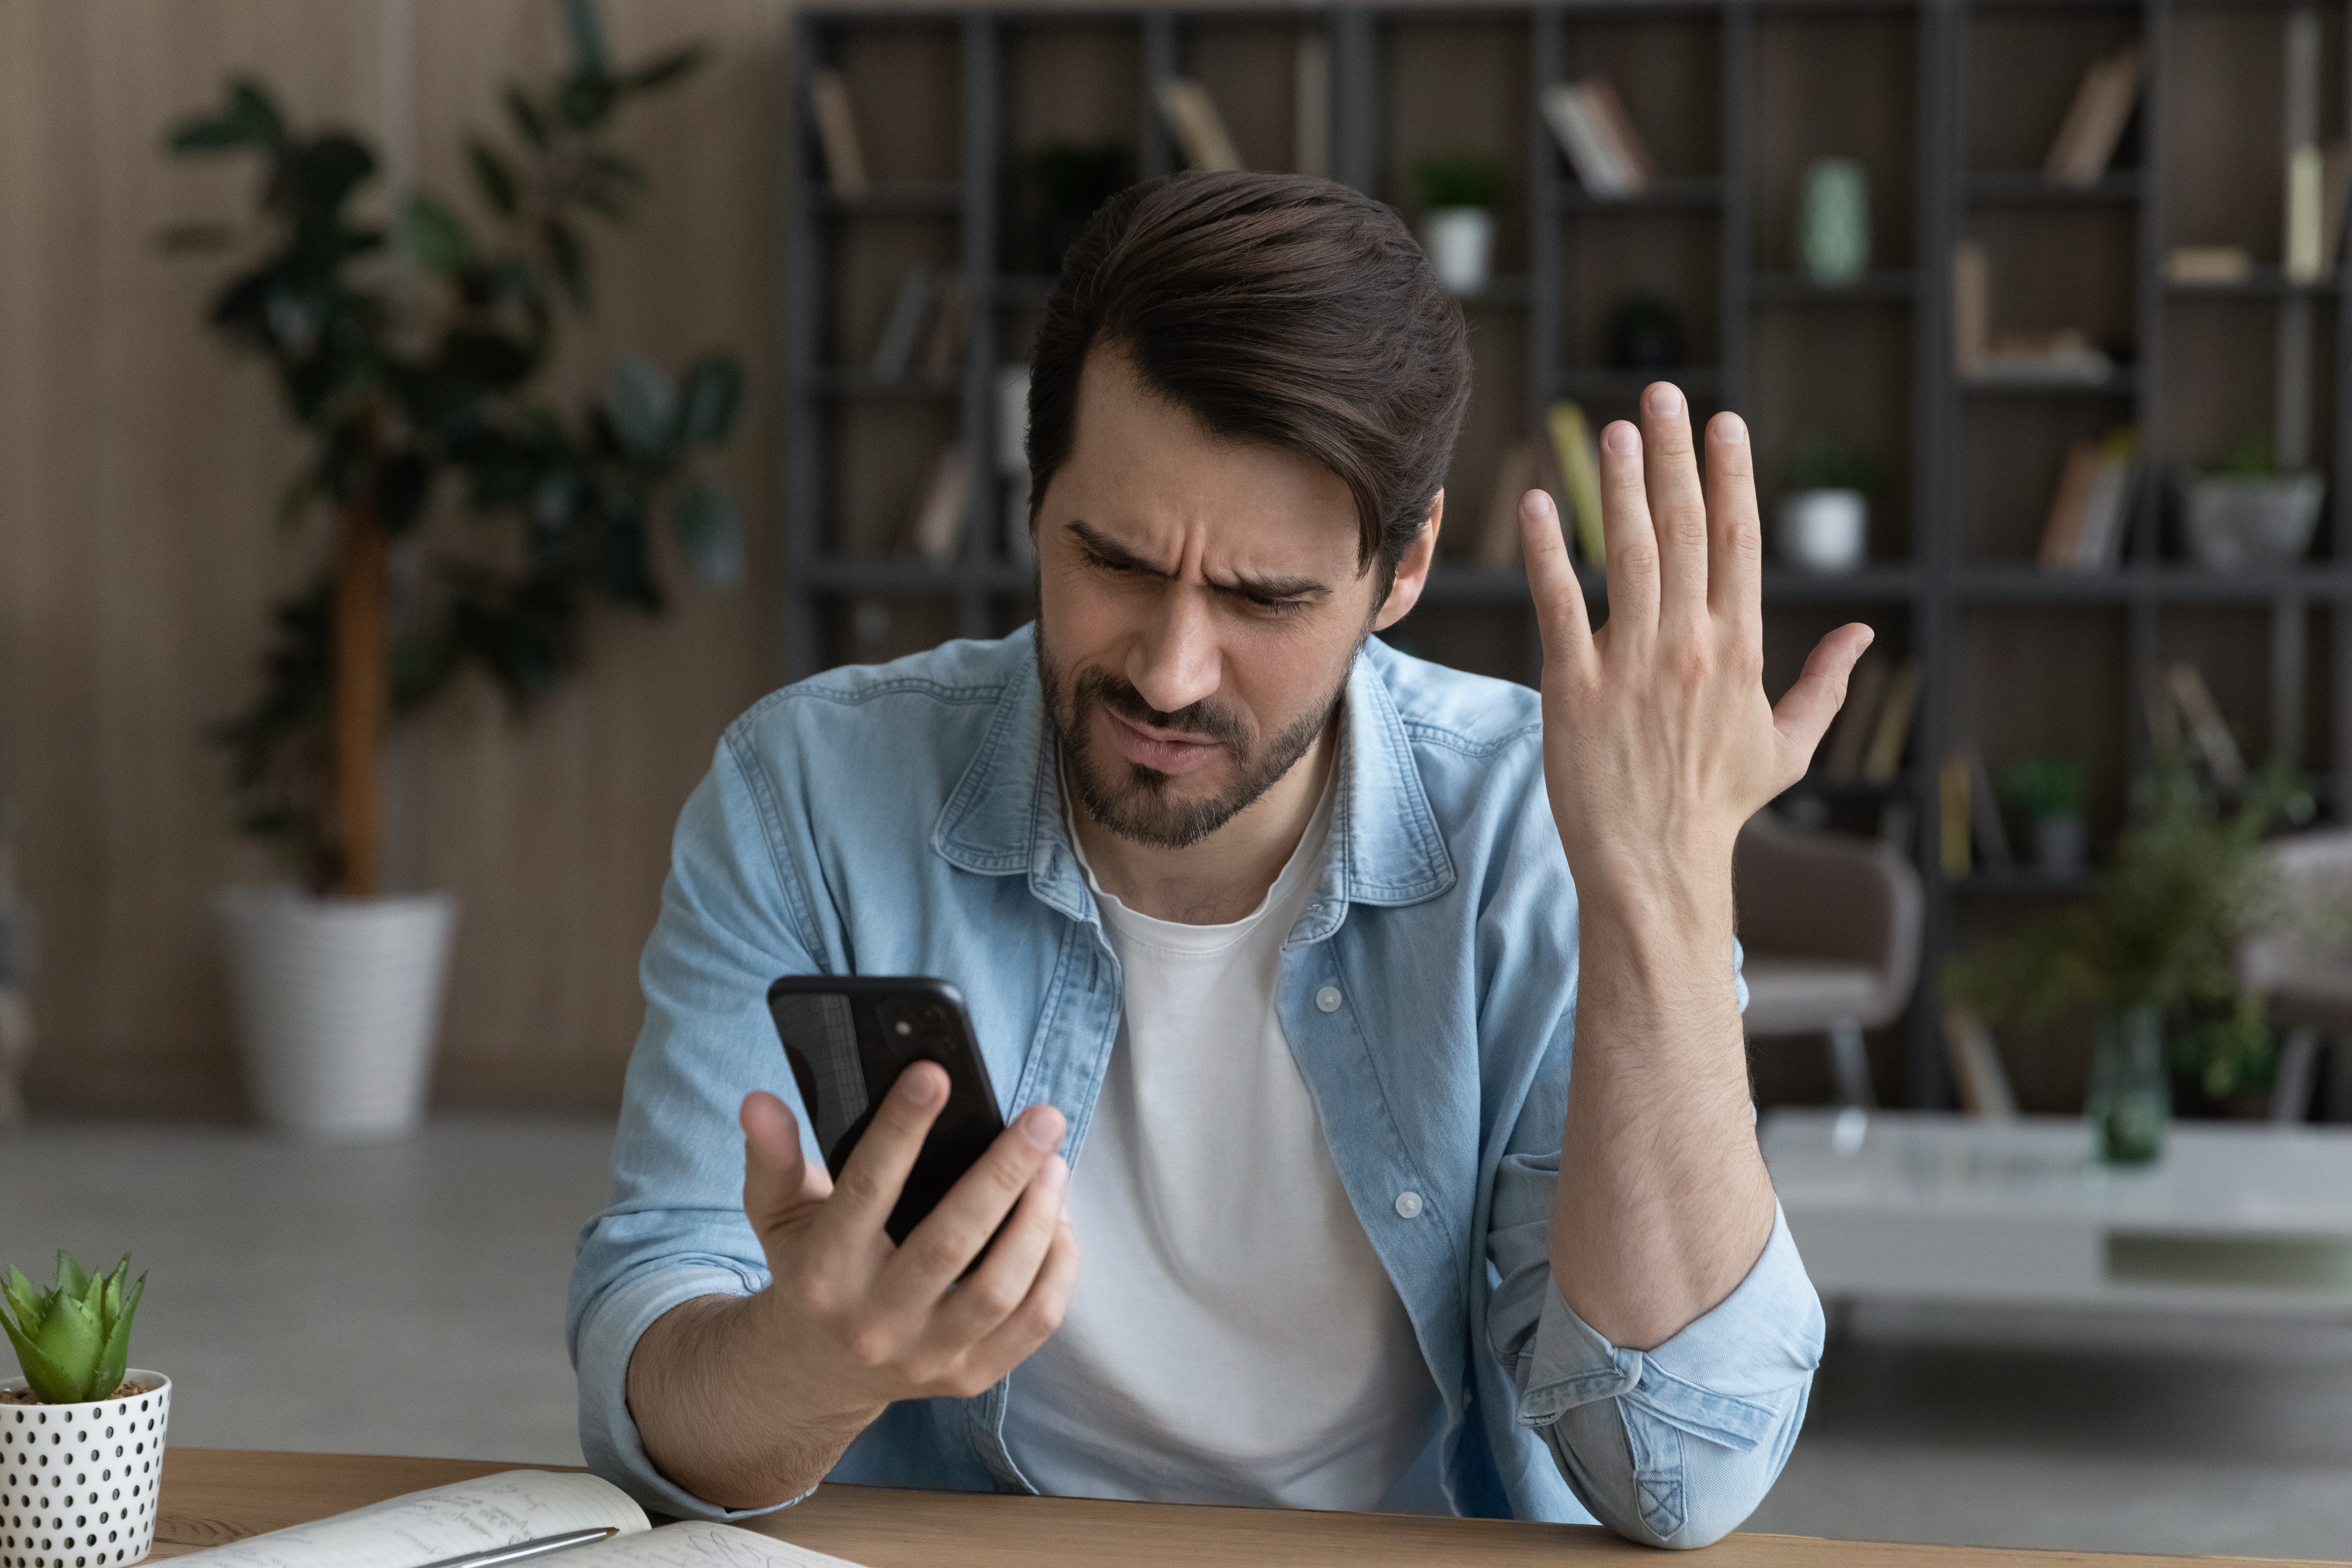 A man looking angrily at his phone | Source: Shutterstock